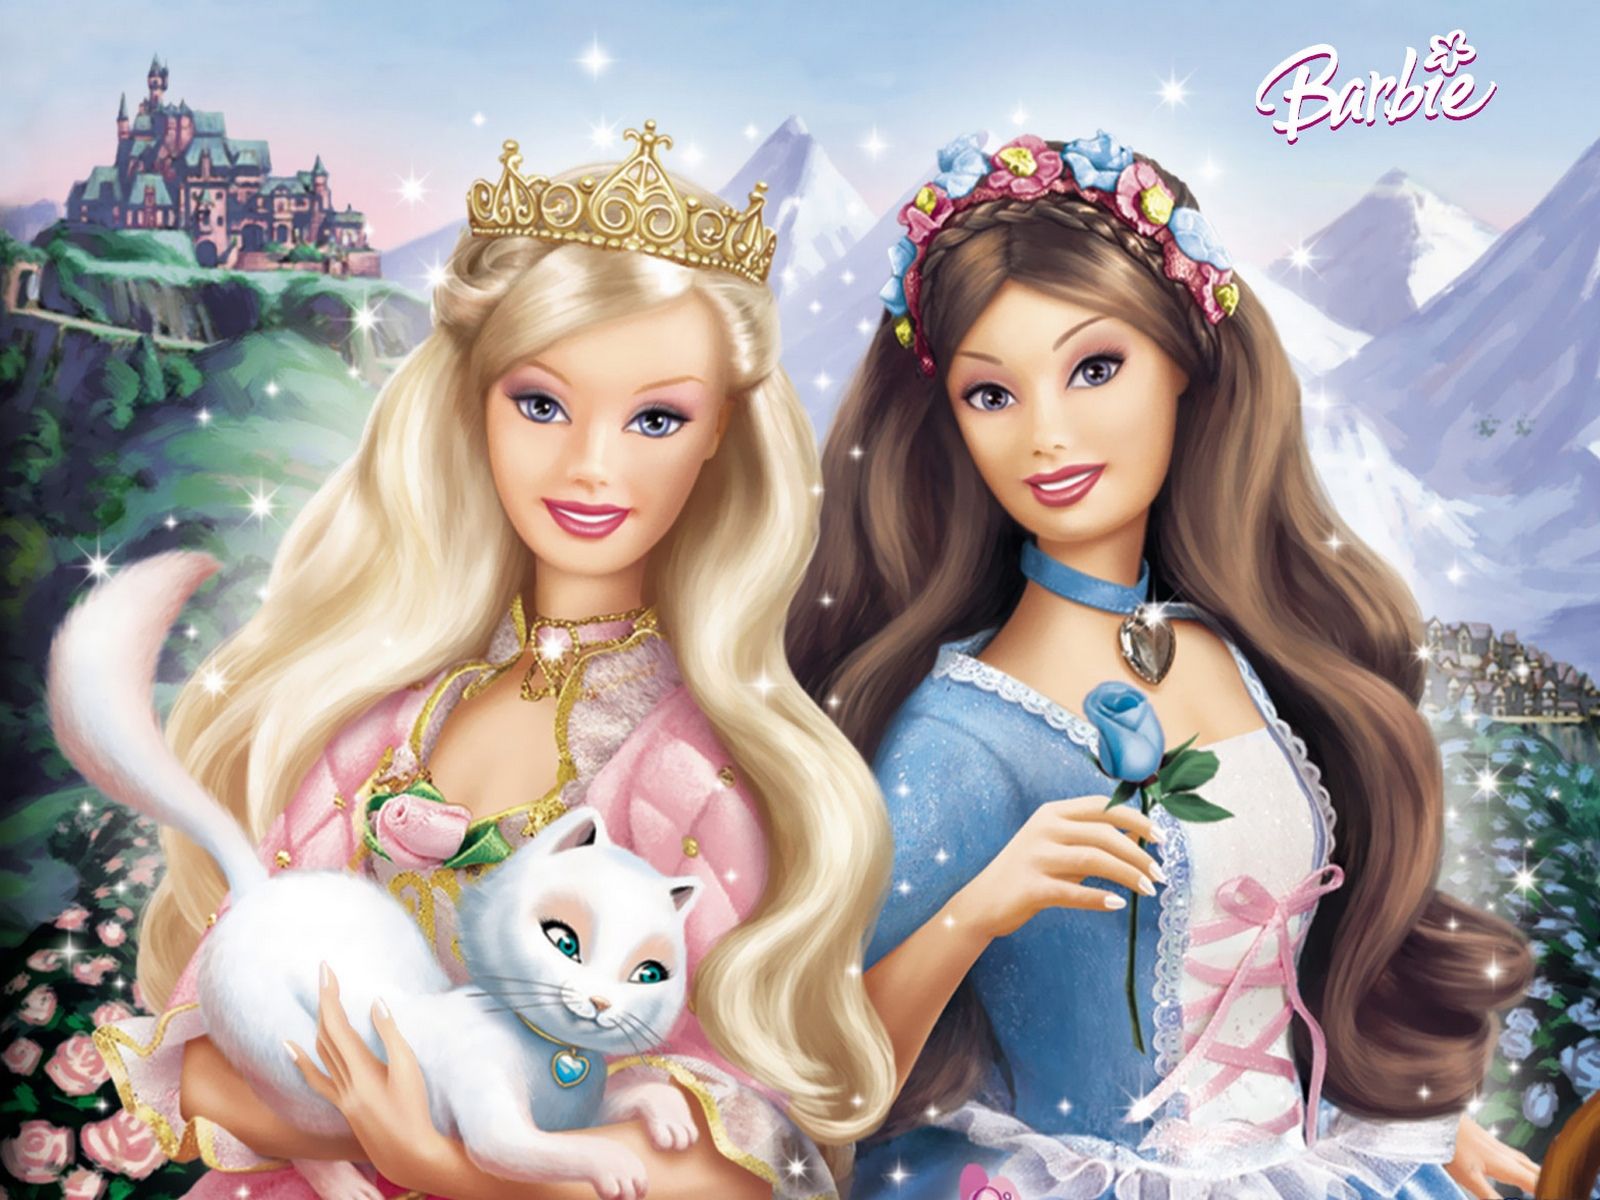 Barbie free Wallpapers (10 photos) for your desktop, download pictures